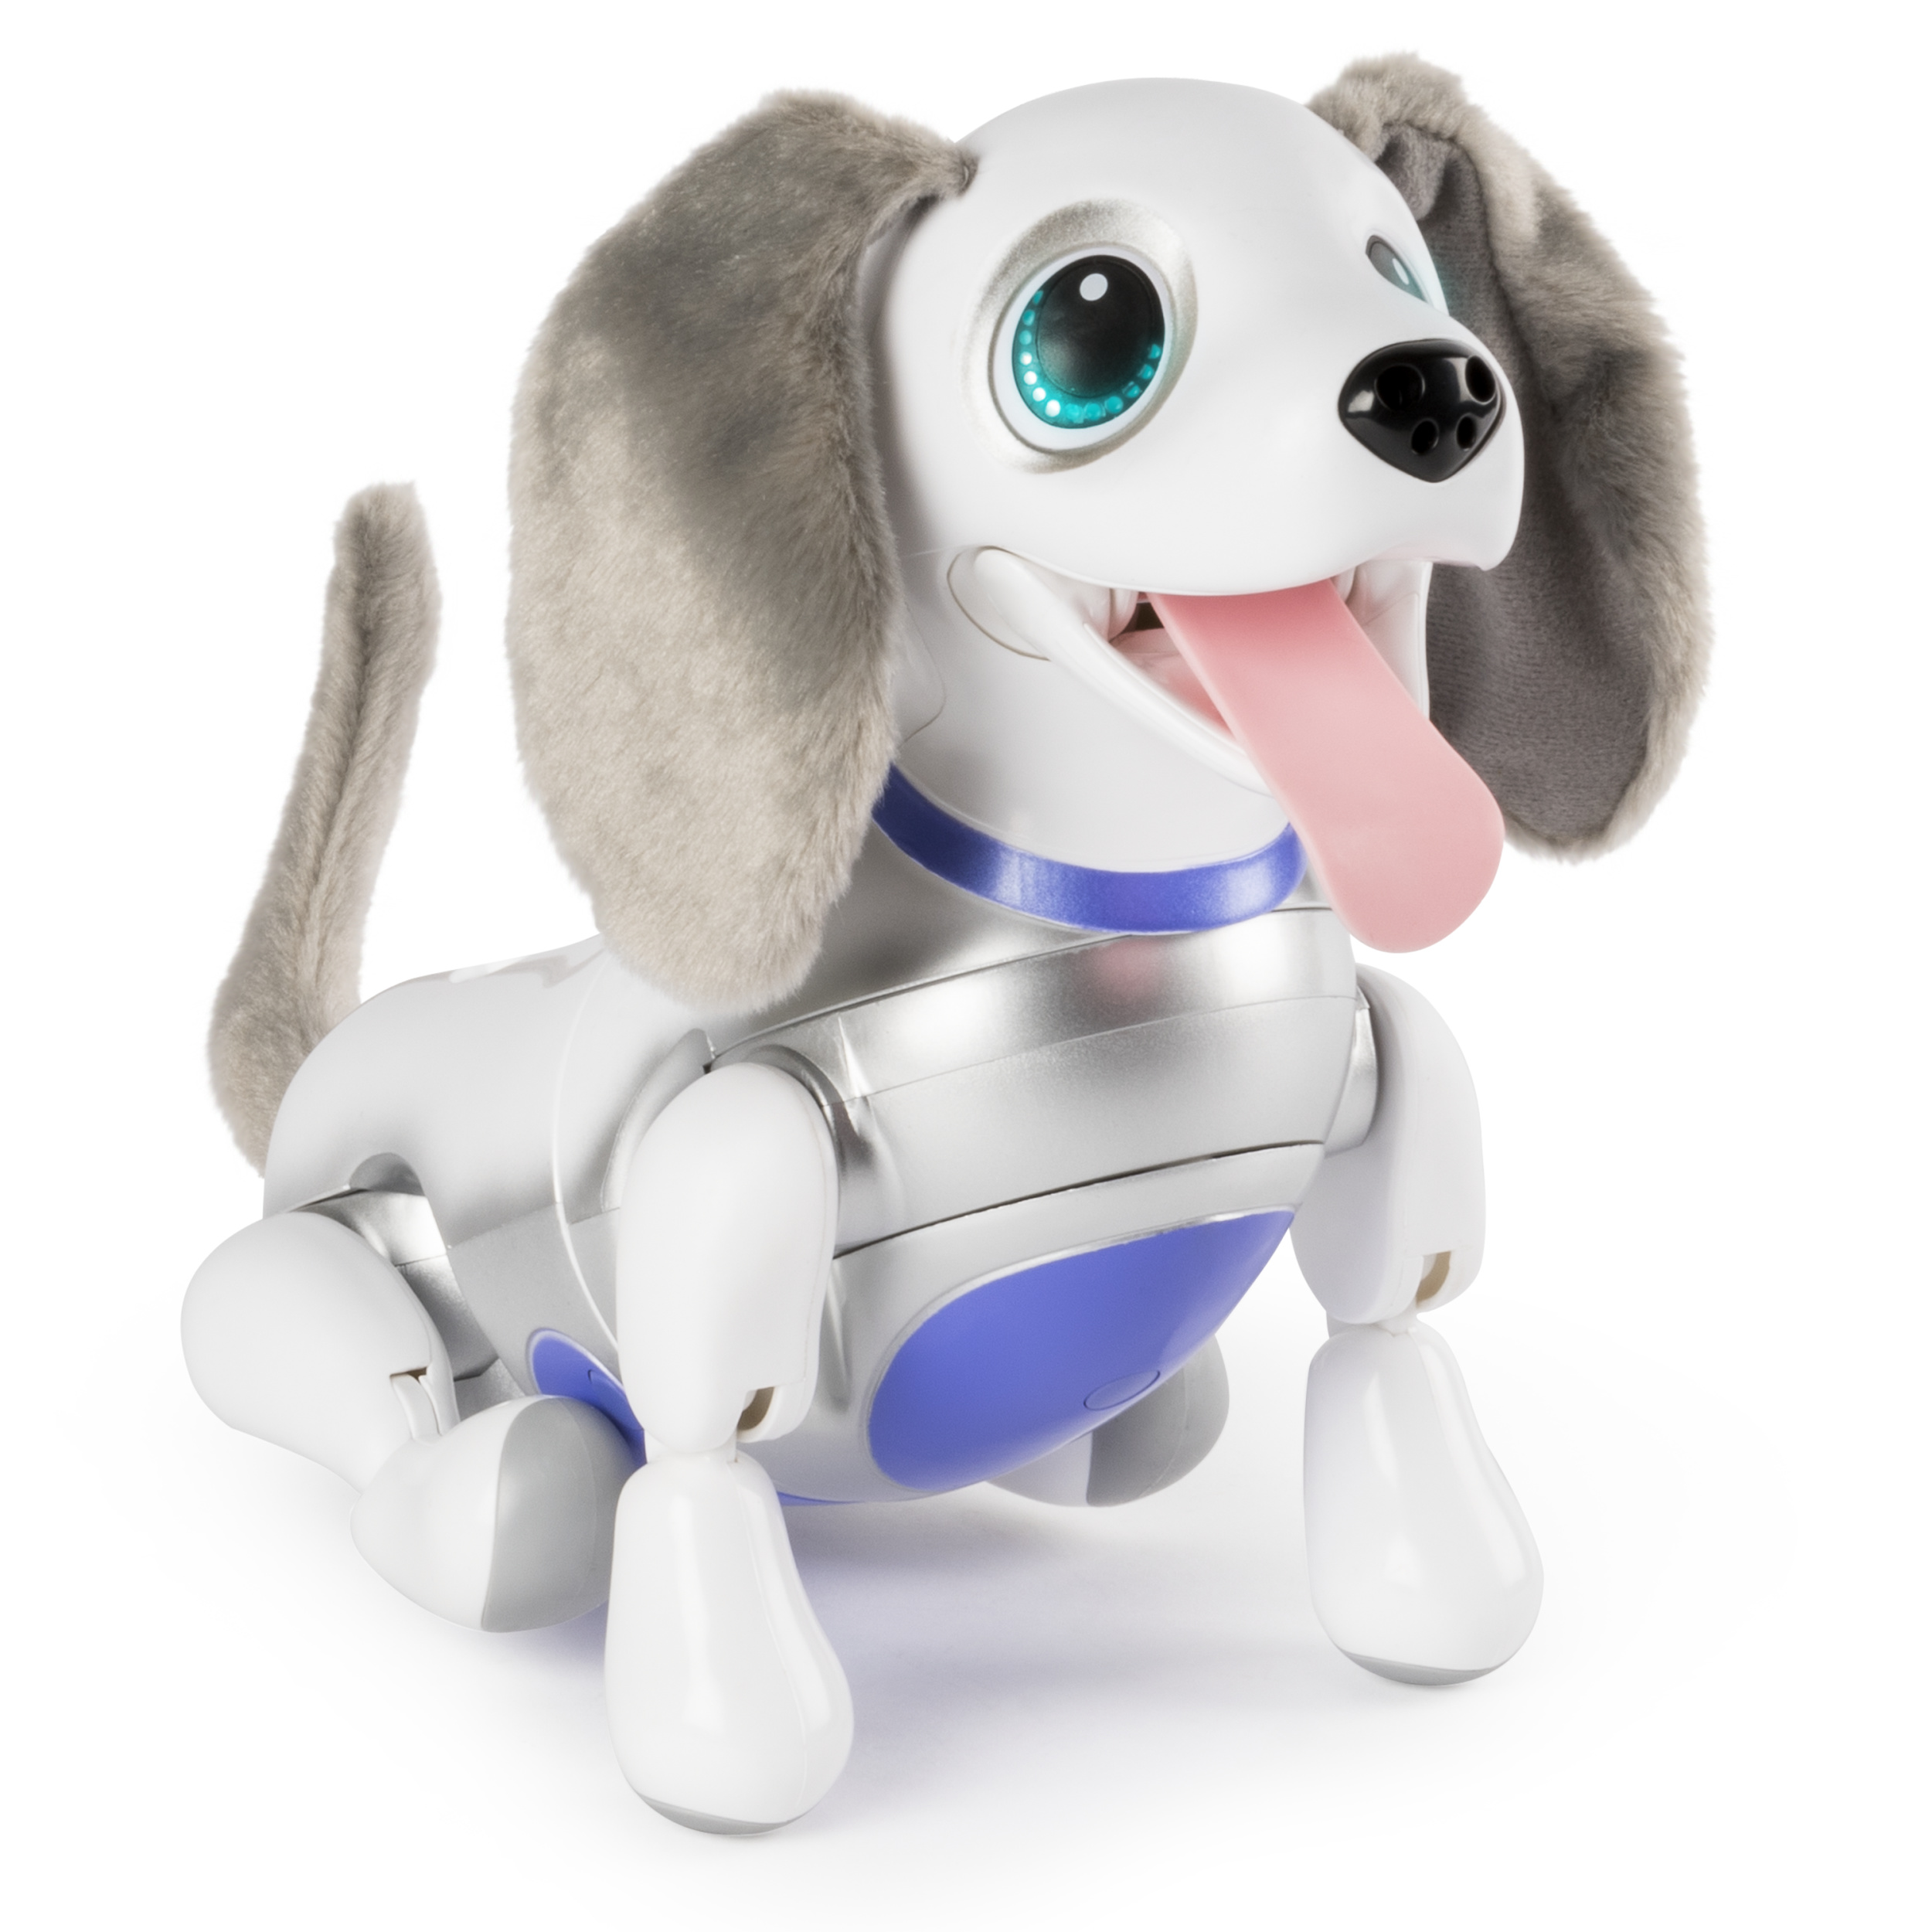 Zoomer Playful Pup, Responsive Robotic Dog with Voice Recognition and Realistic Motion, for Ages 5 and Up